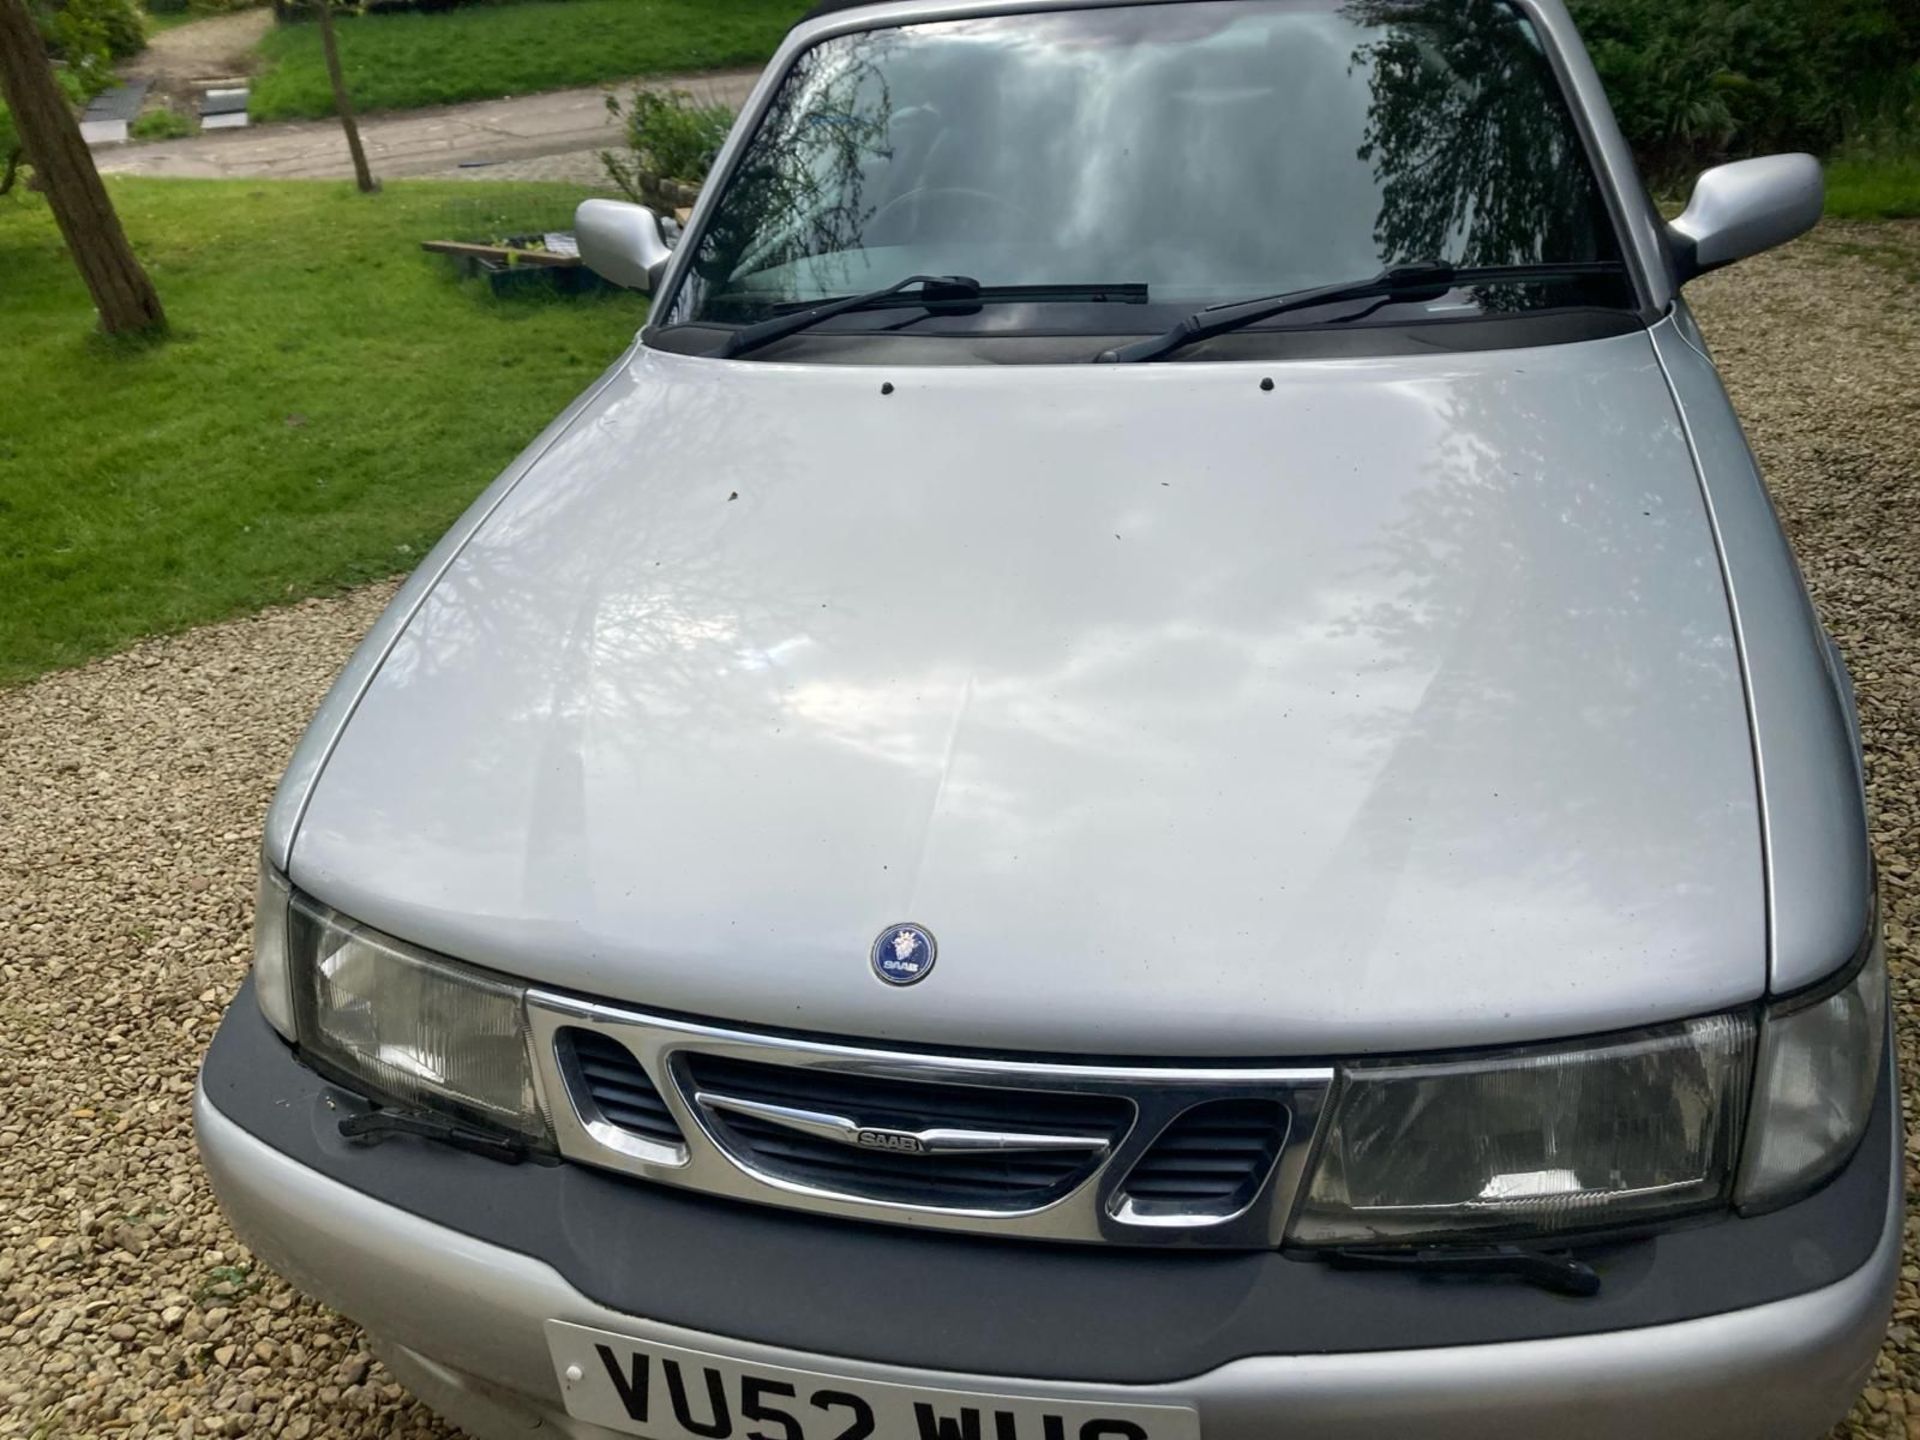 2002 Saab 9-3 Aero Convertible with 11 months MOT - Offered at No Reserve - Image 7 of 24